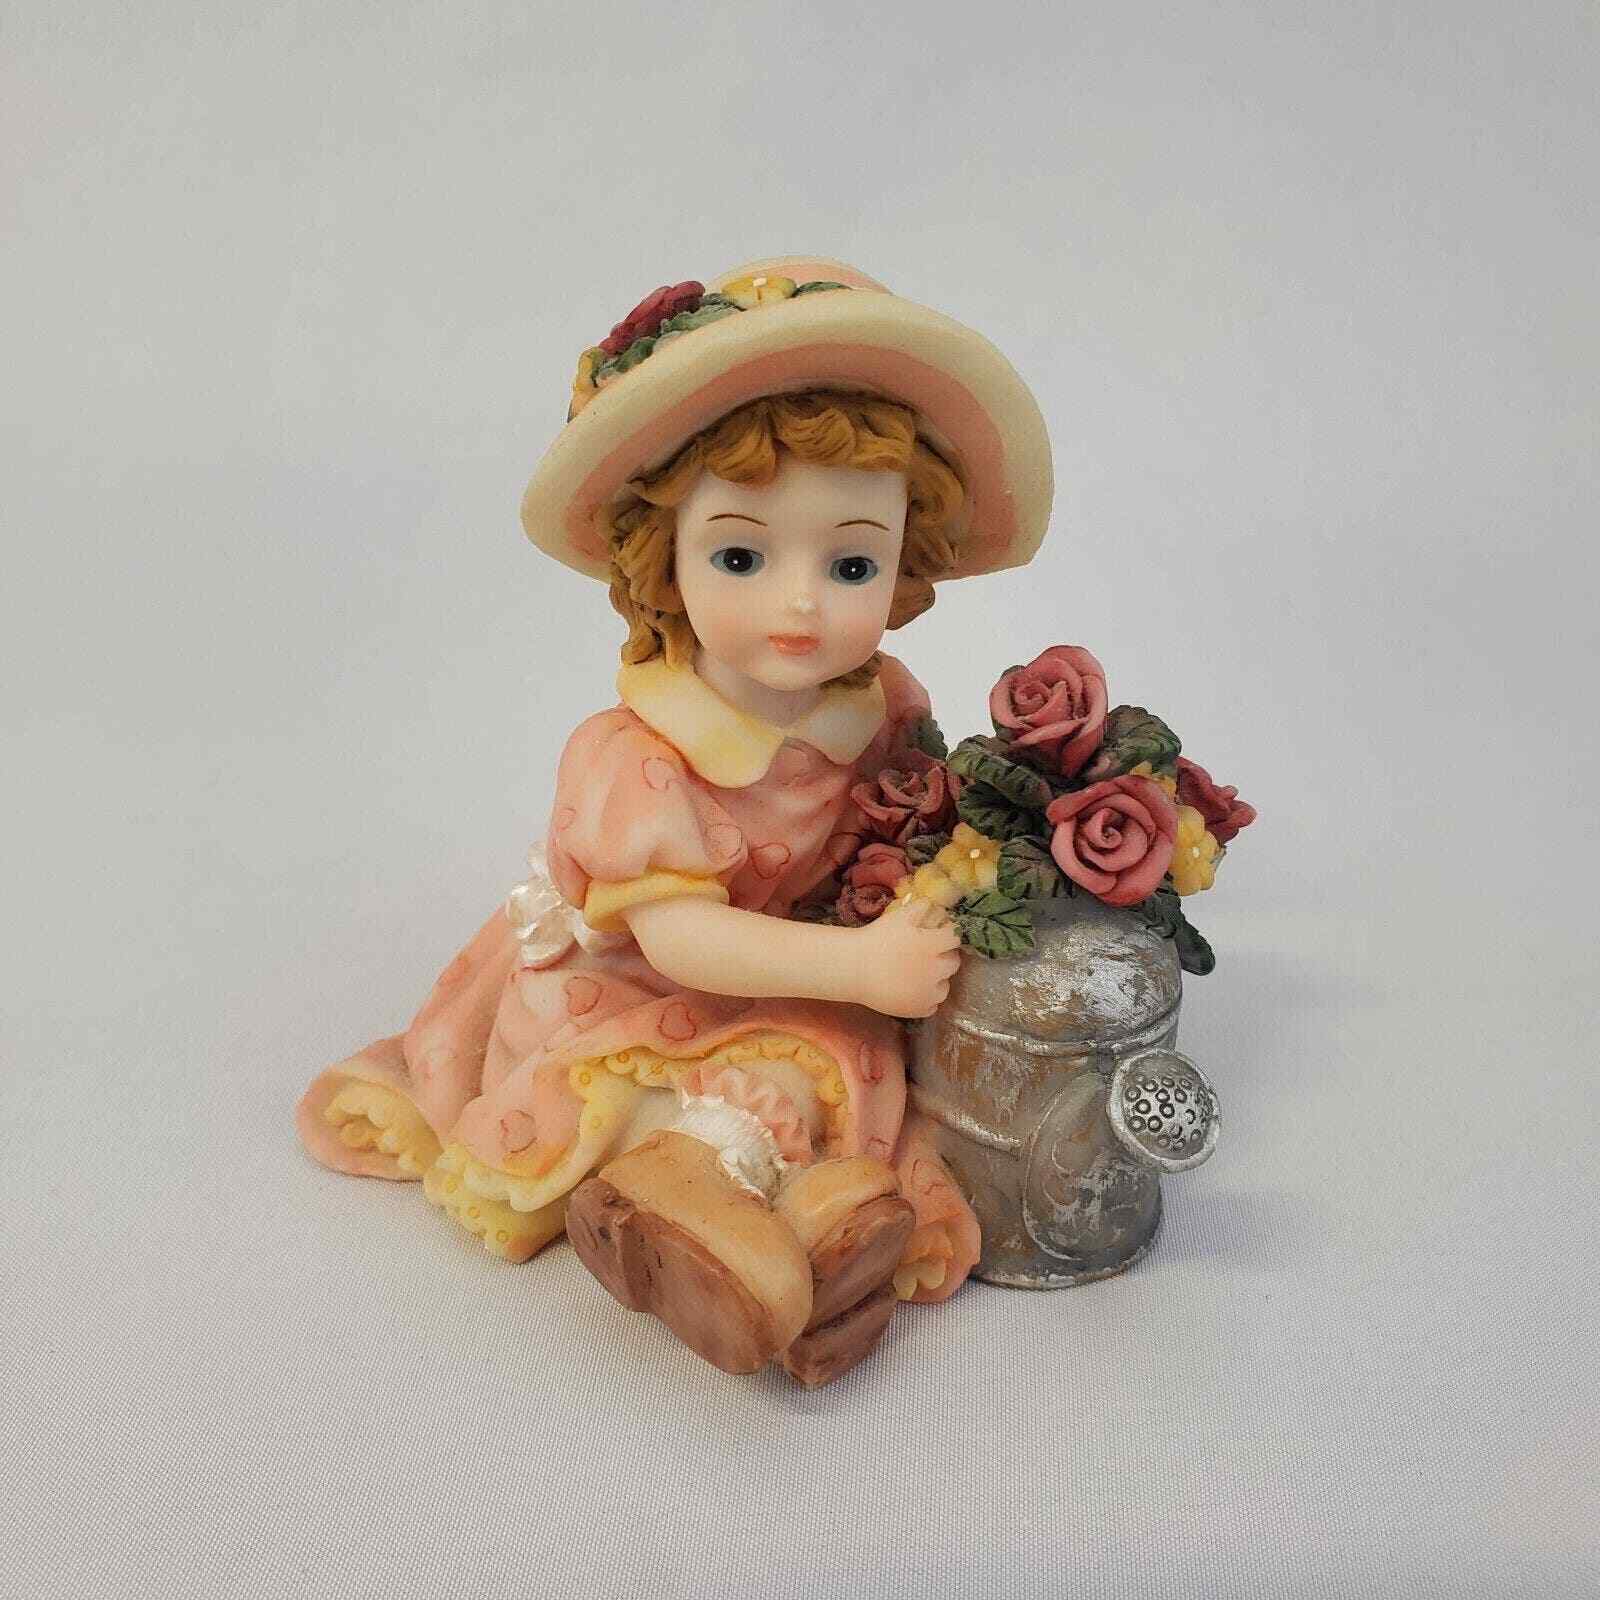 Montefiori Collection Figurine Girl With Watering Can & Flowers - Collectible